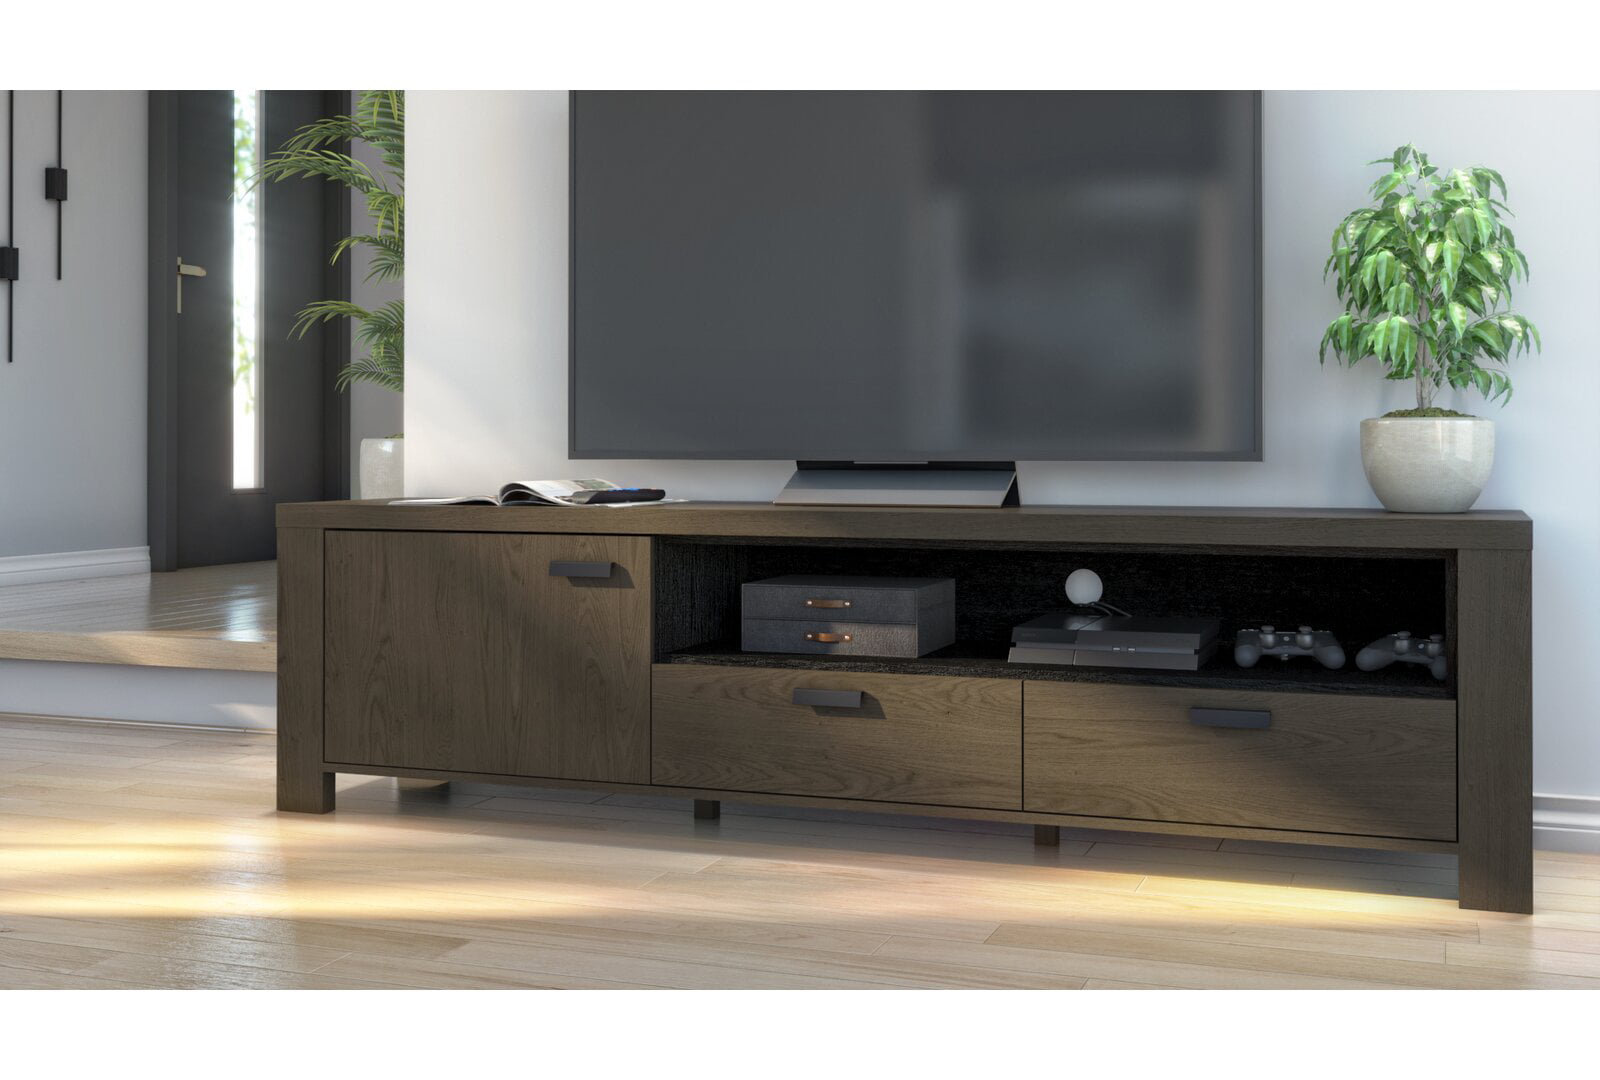 Details about   3-in-1 Flat Panel TV Stand Media Entertainment Unit Table Furniture Up To 65 